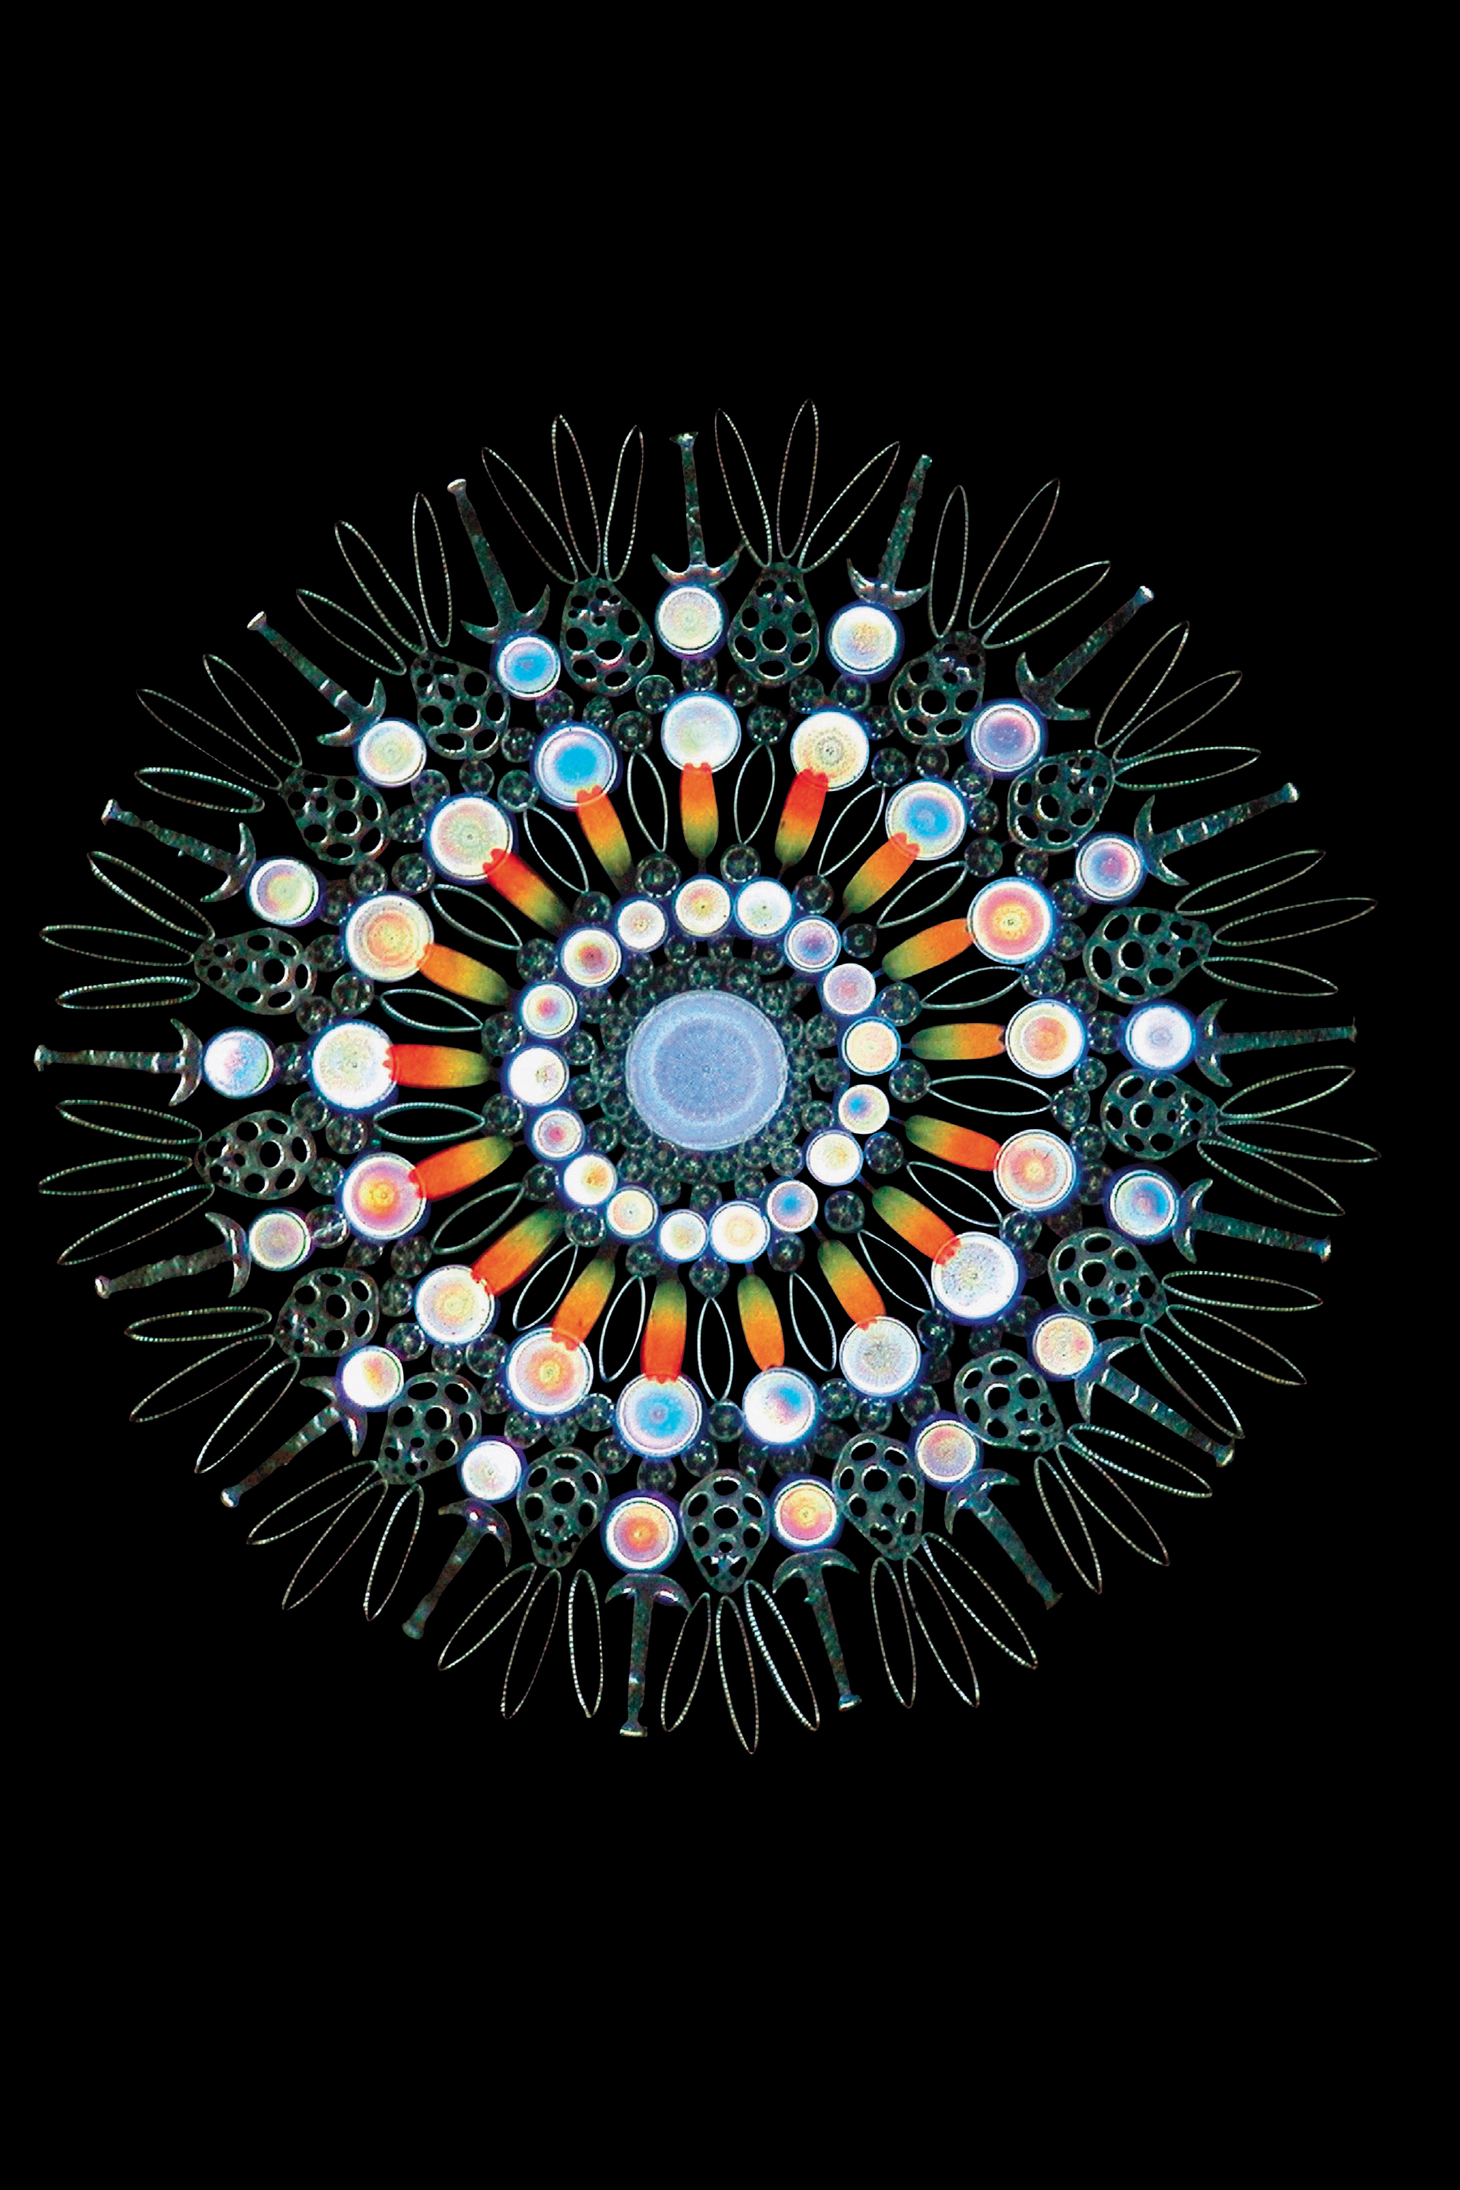 A Victorian art form made possible by the microscope This one includes diatoms - photo 5